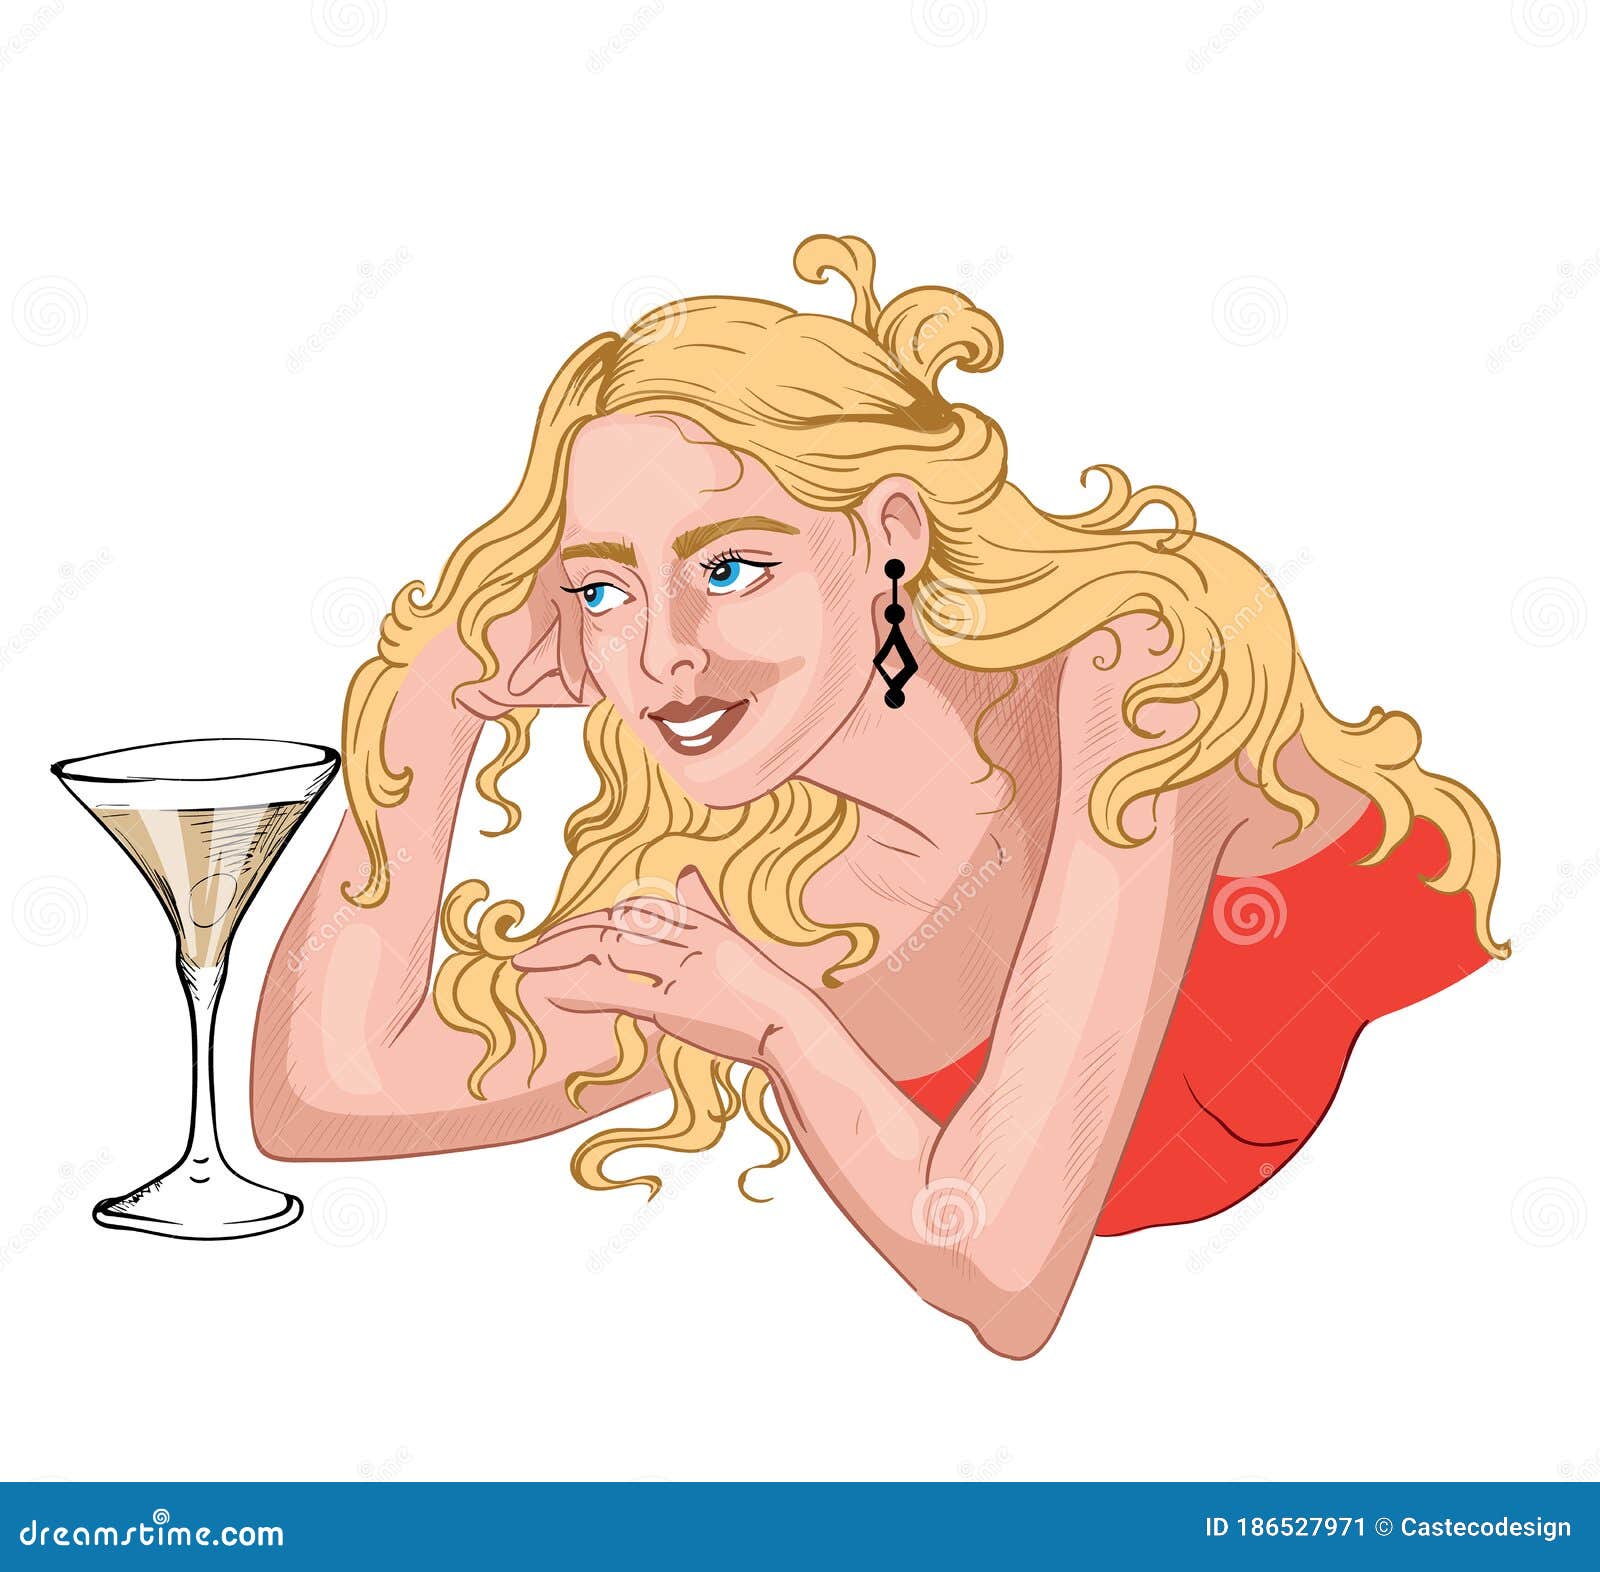 Elegant Woman With Blonde Messy Hair Laying Near A Glass Of Martini